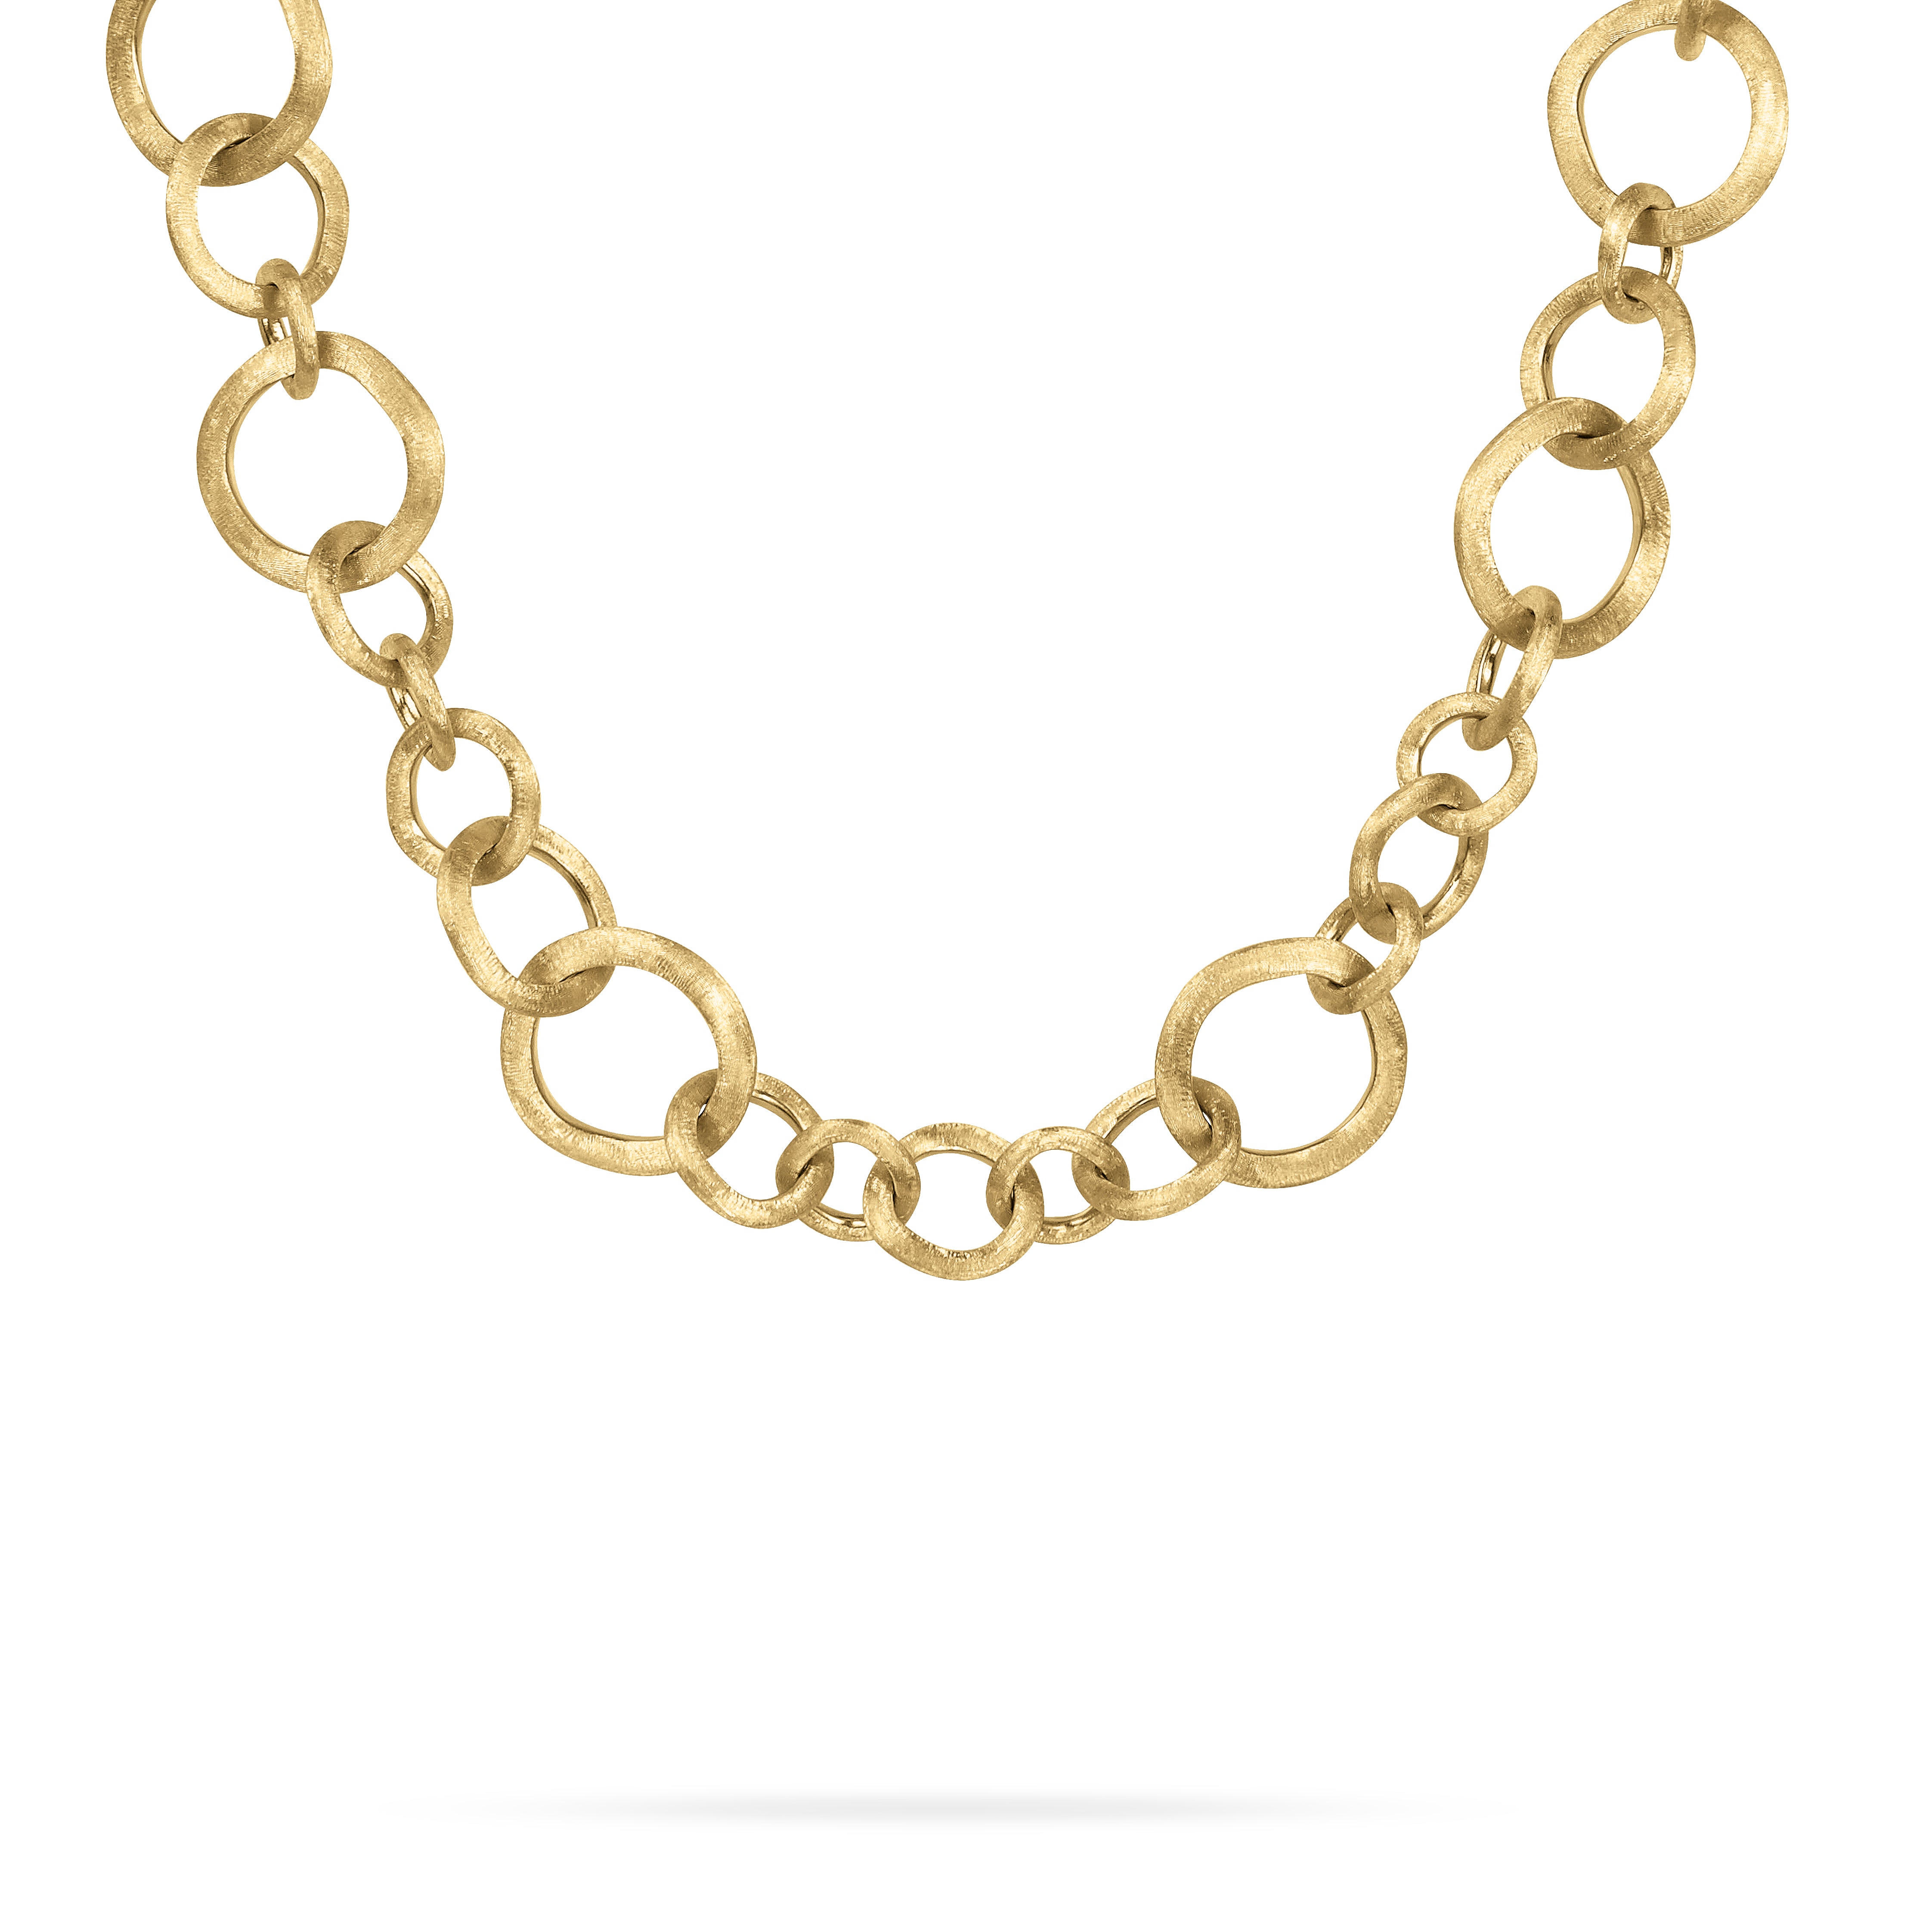 Marco Bicego Jaipur Collection Gold Small Gauge Necklace